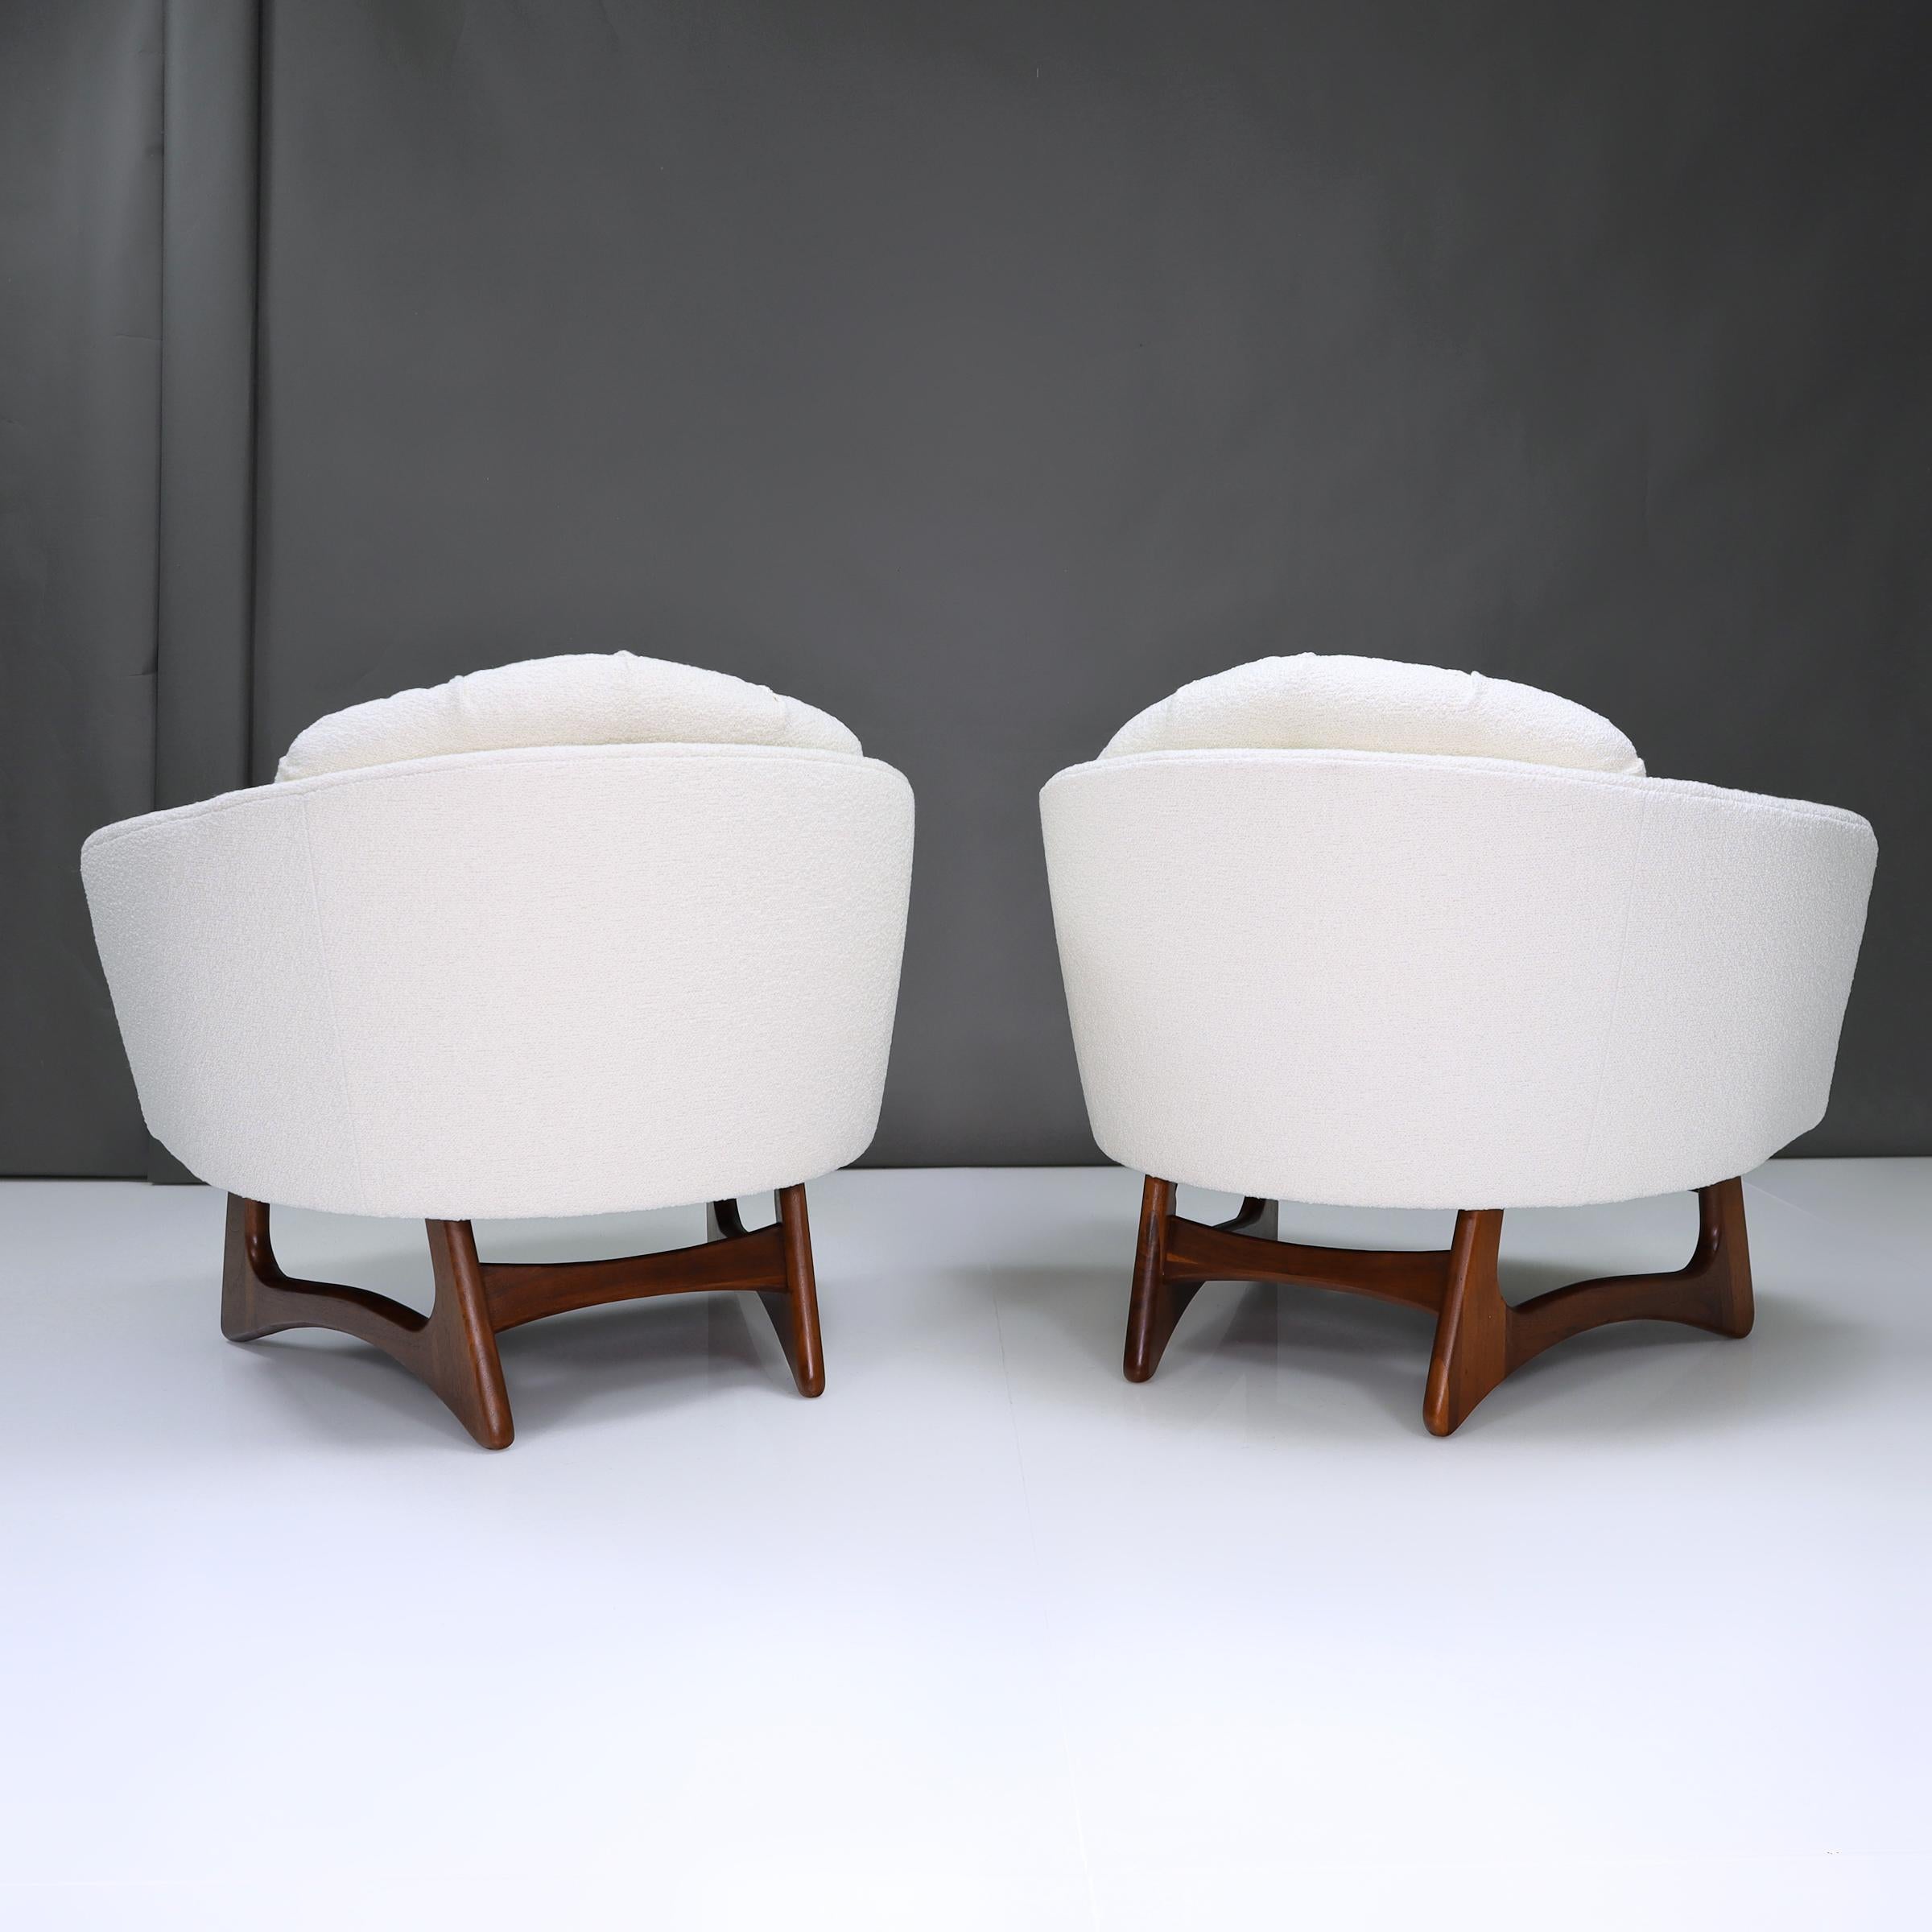 Mid-Century Modern 1960s Adrian Pearsall for Craft Associates Barrel Chairs - A Pair